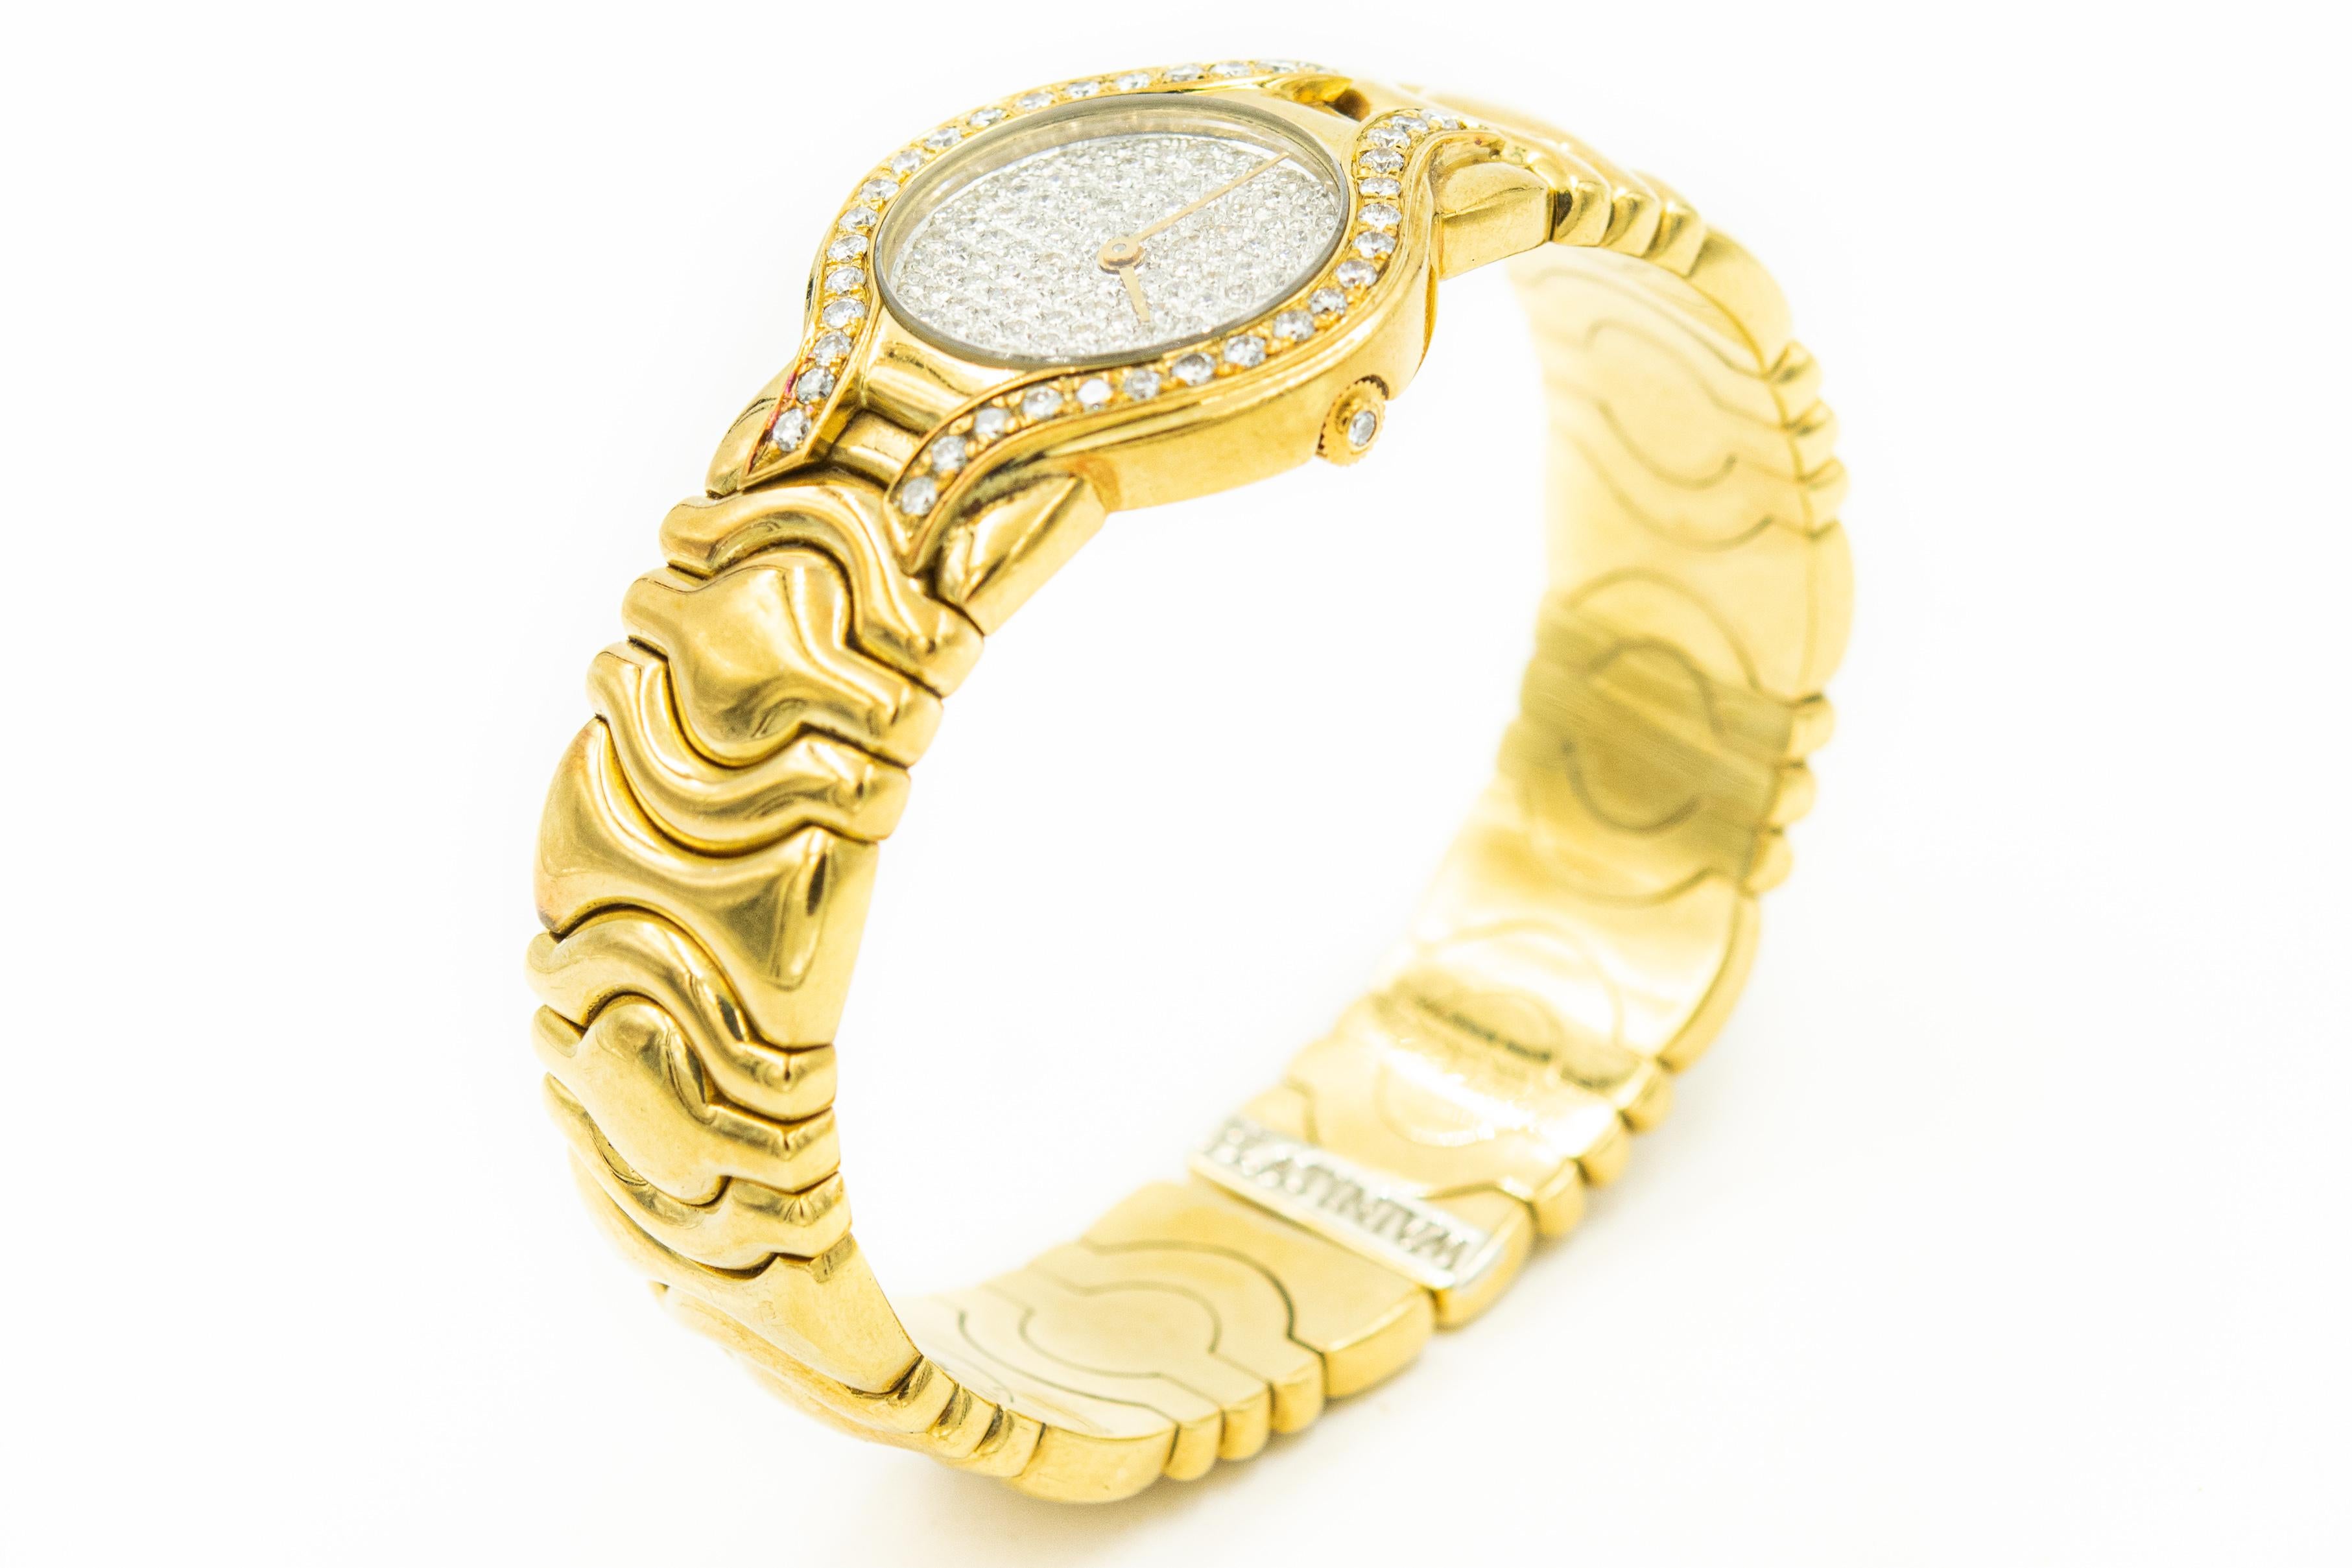 Ladies 18k Yellow Gold Platinum Cuff Watch with Diamond Face and Bezel 2